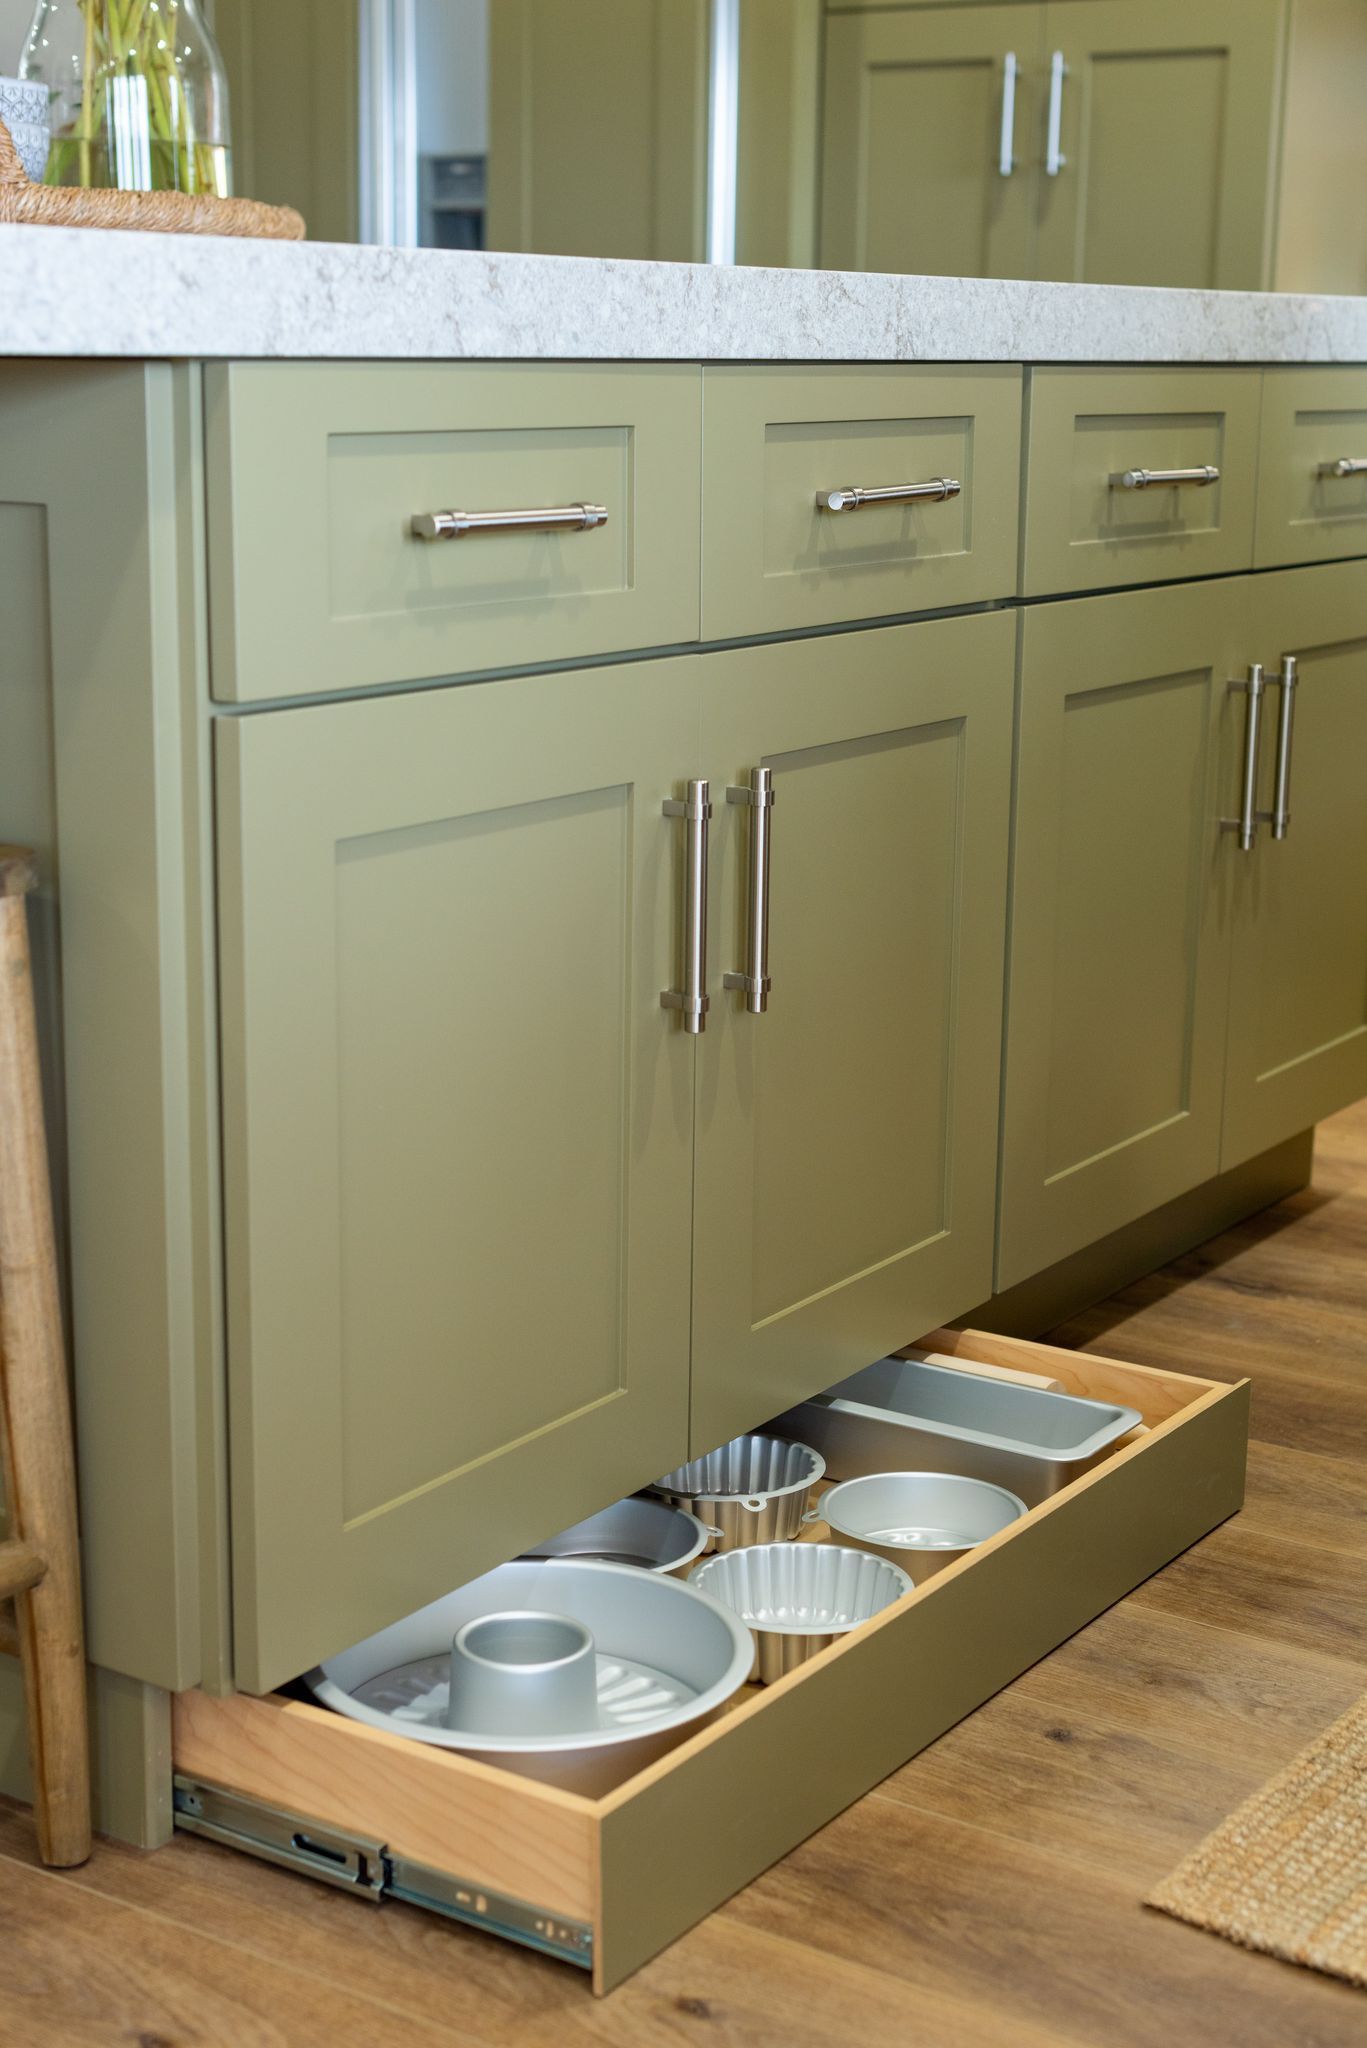 Making the Most of Small Kitchens: Tips and Tricks for Limited Space